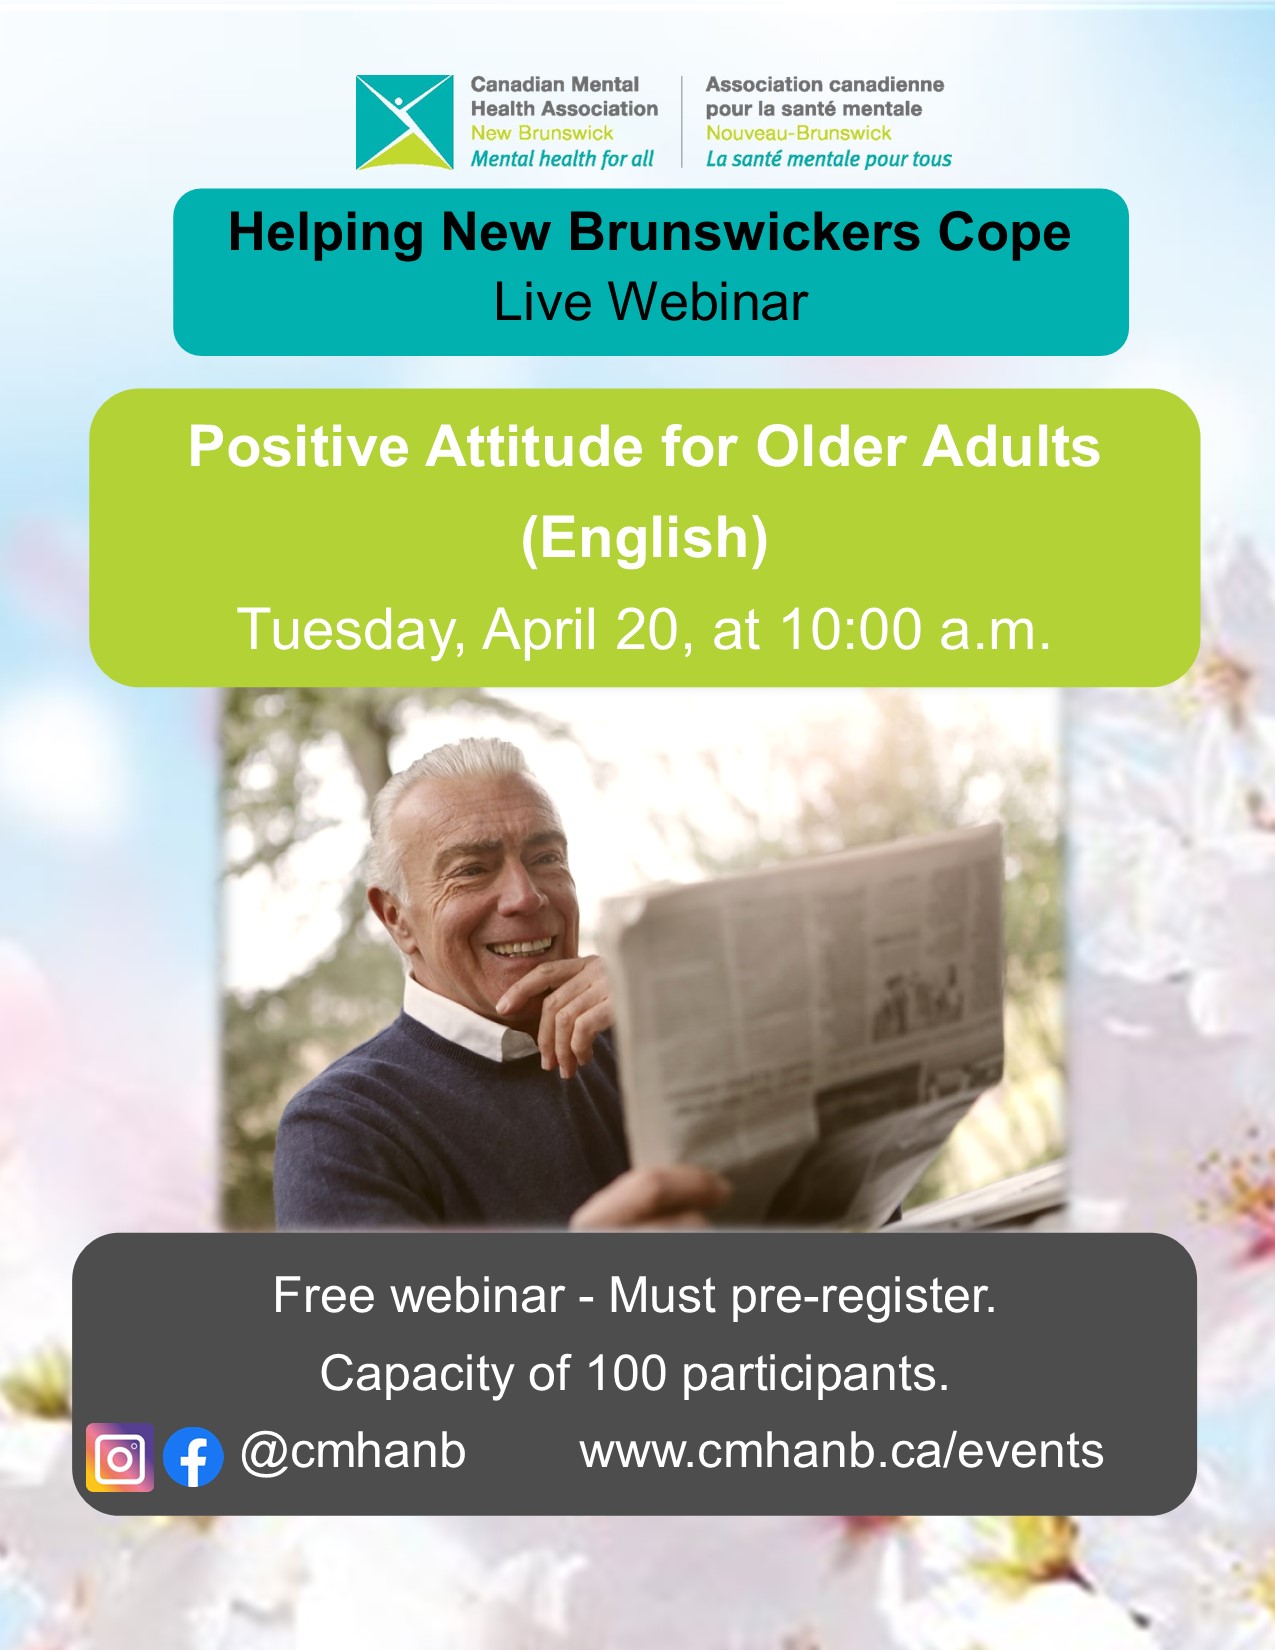 Positive attitude for older adults (English)